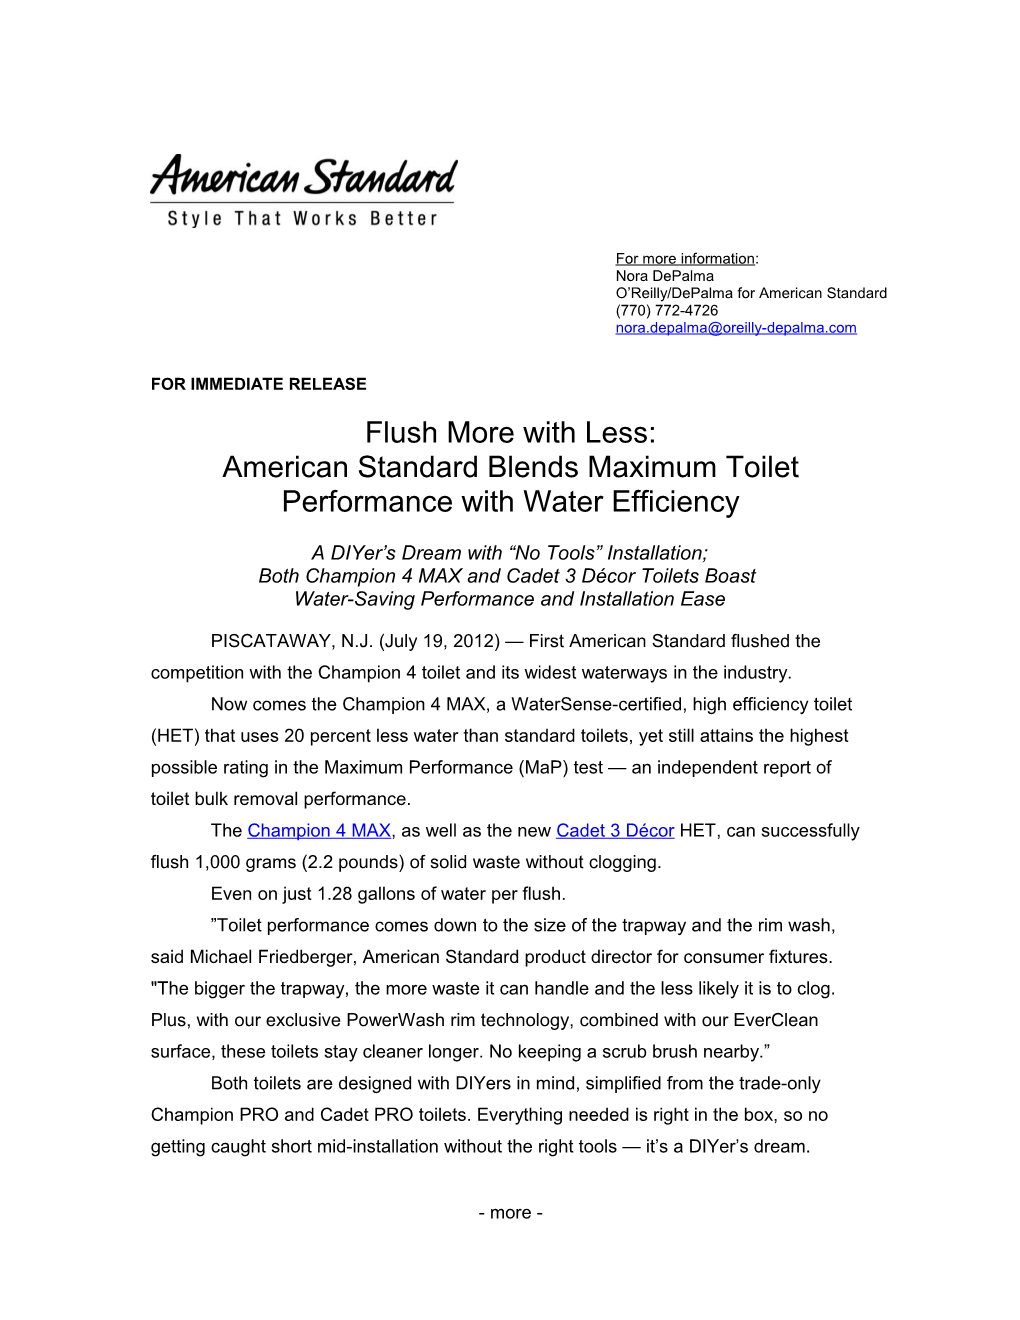 Flush More with Less: American Standard Blends Maximum Toilet Performance with Water